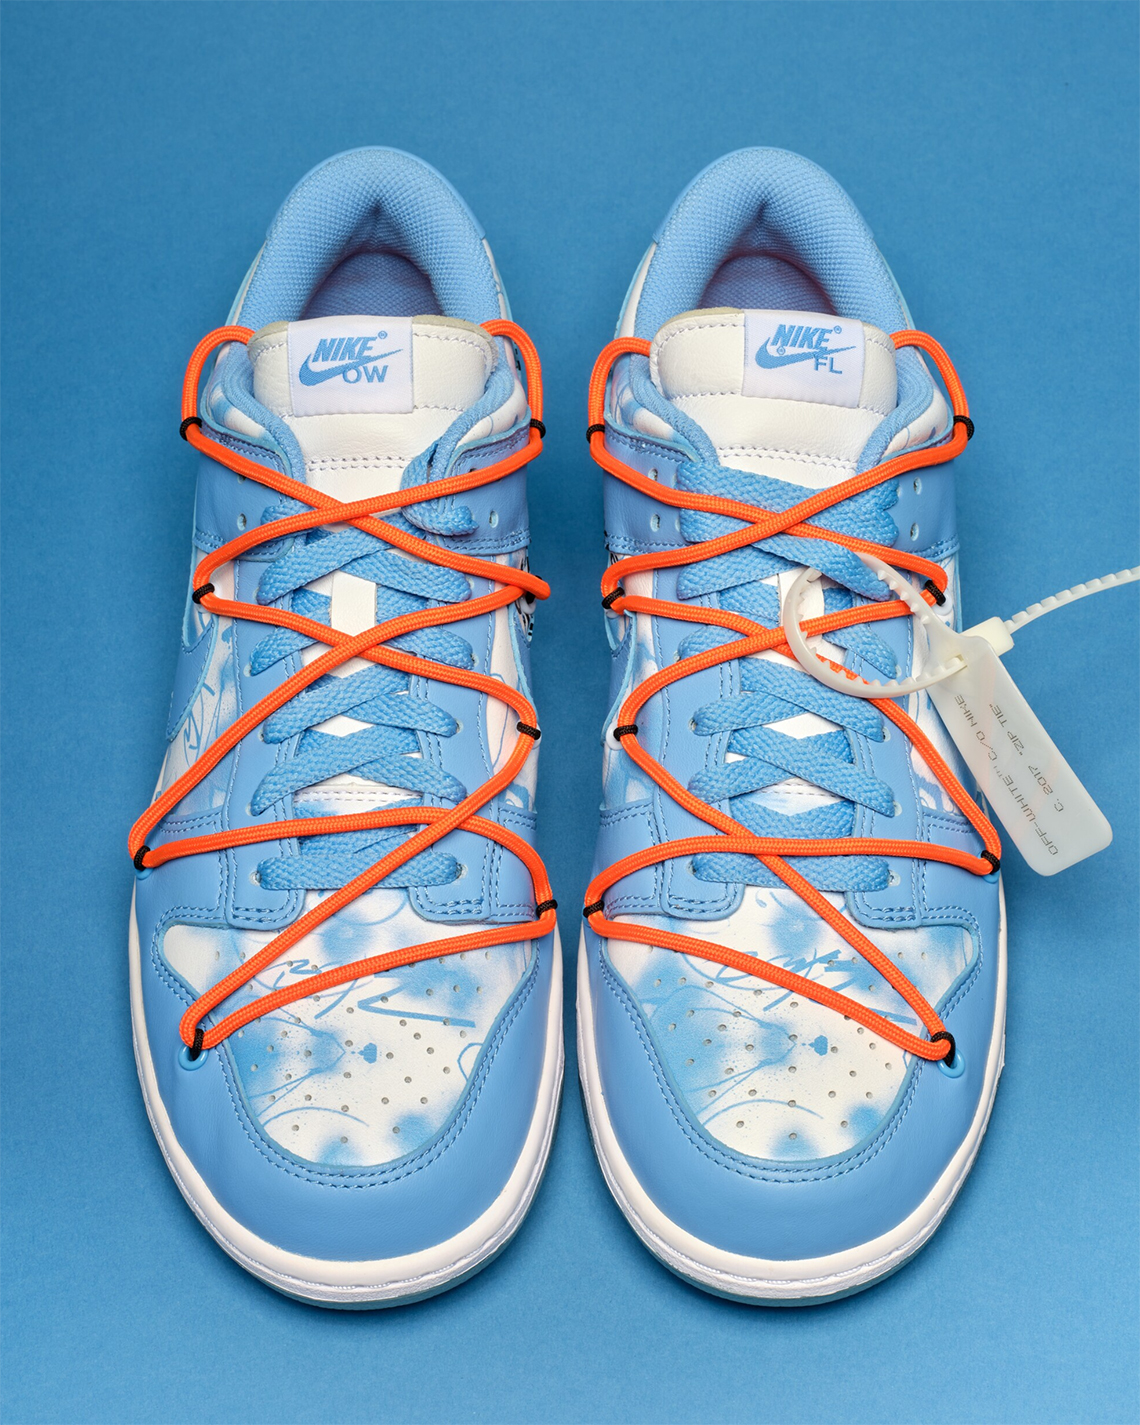 Off-White Futura Nike Dunk Sotheby's Auction | SneakerNews.com